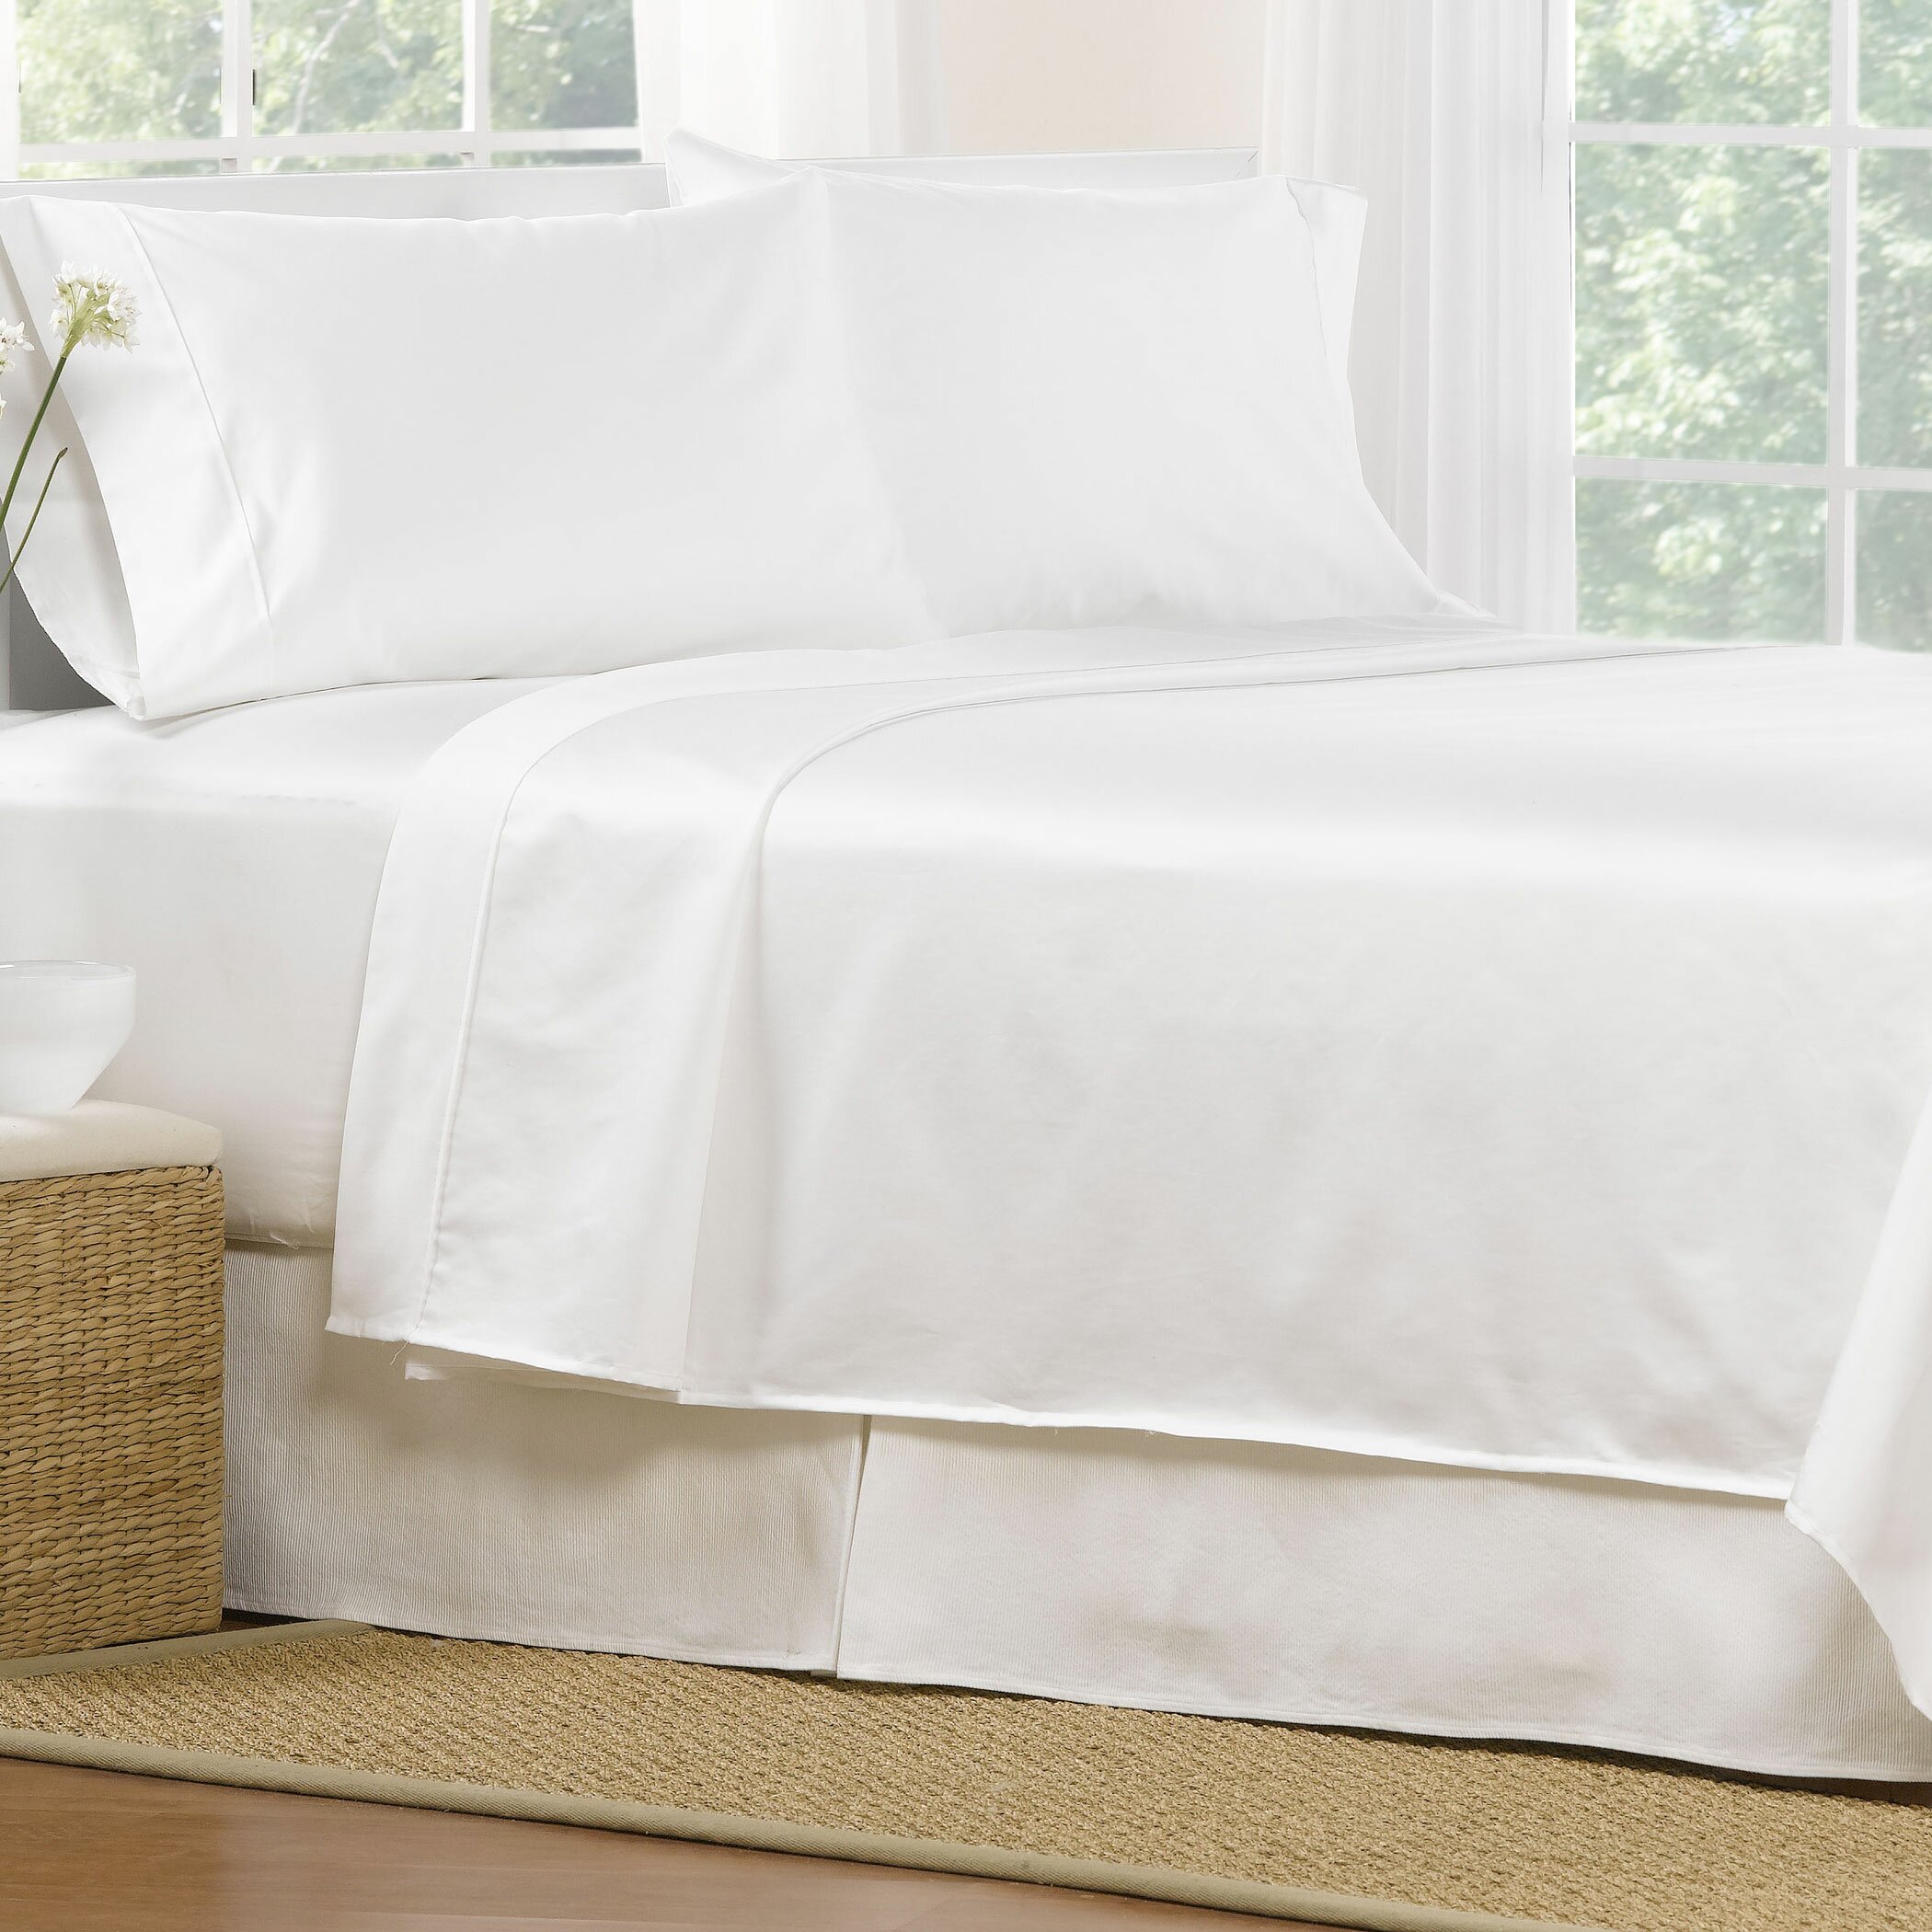 Aspire Linens 4 Piece 1000 Thread Count Egyptian Quality Cotton Sheet